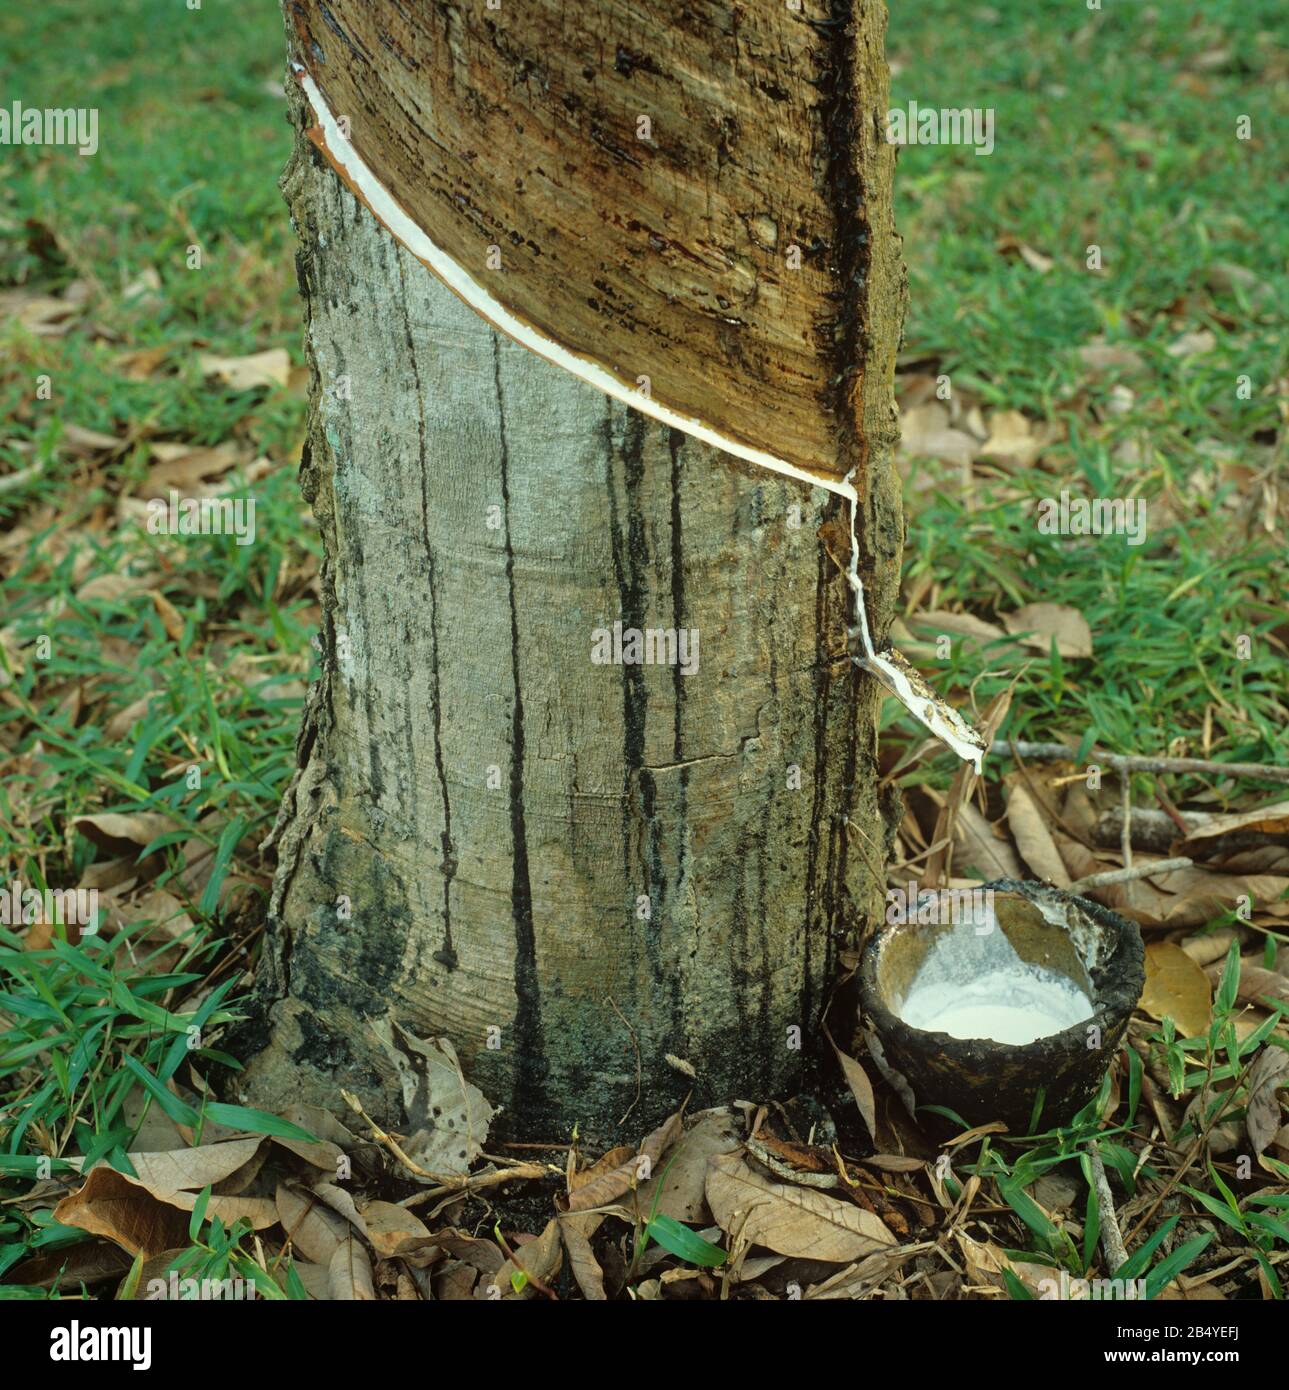 White latex flowing from the newly made cut in the bark of the rubber tree (Hevea brasiliensis), Malacca, Malaysia, February Stock Photo